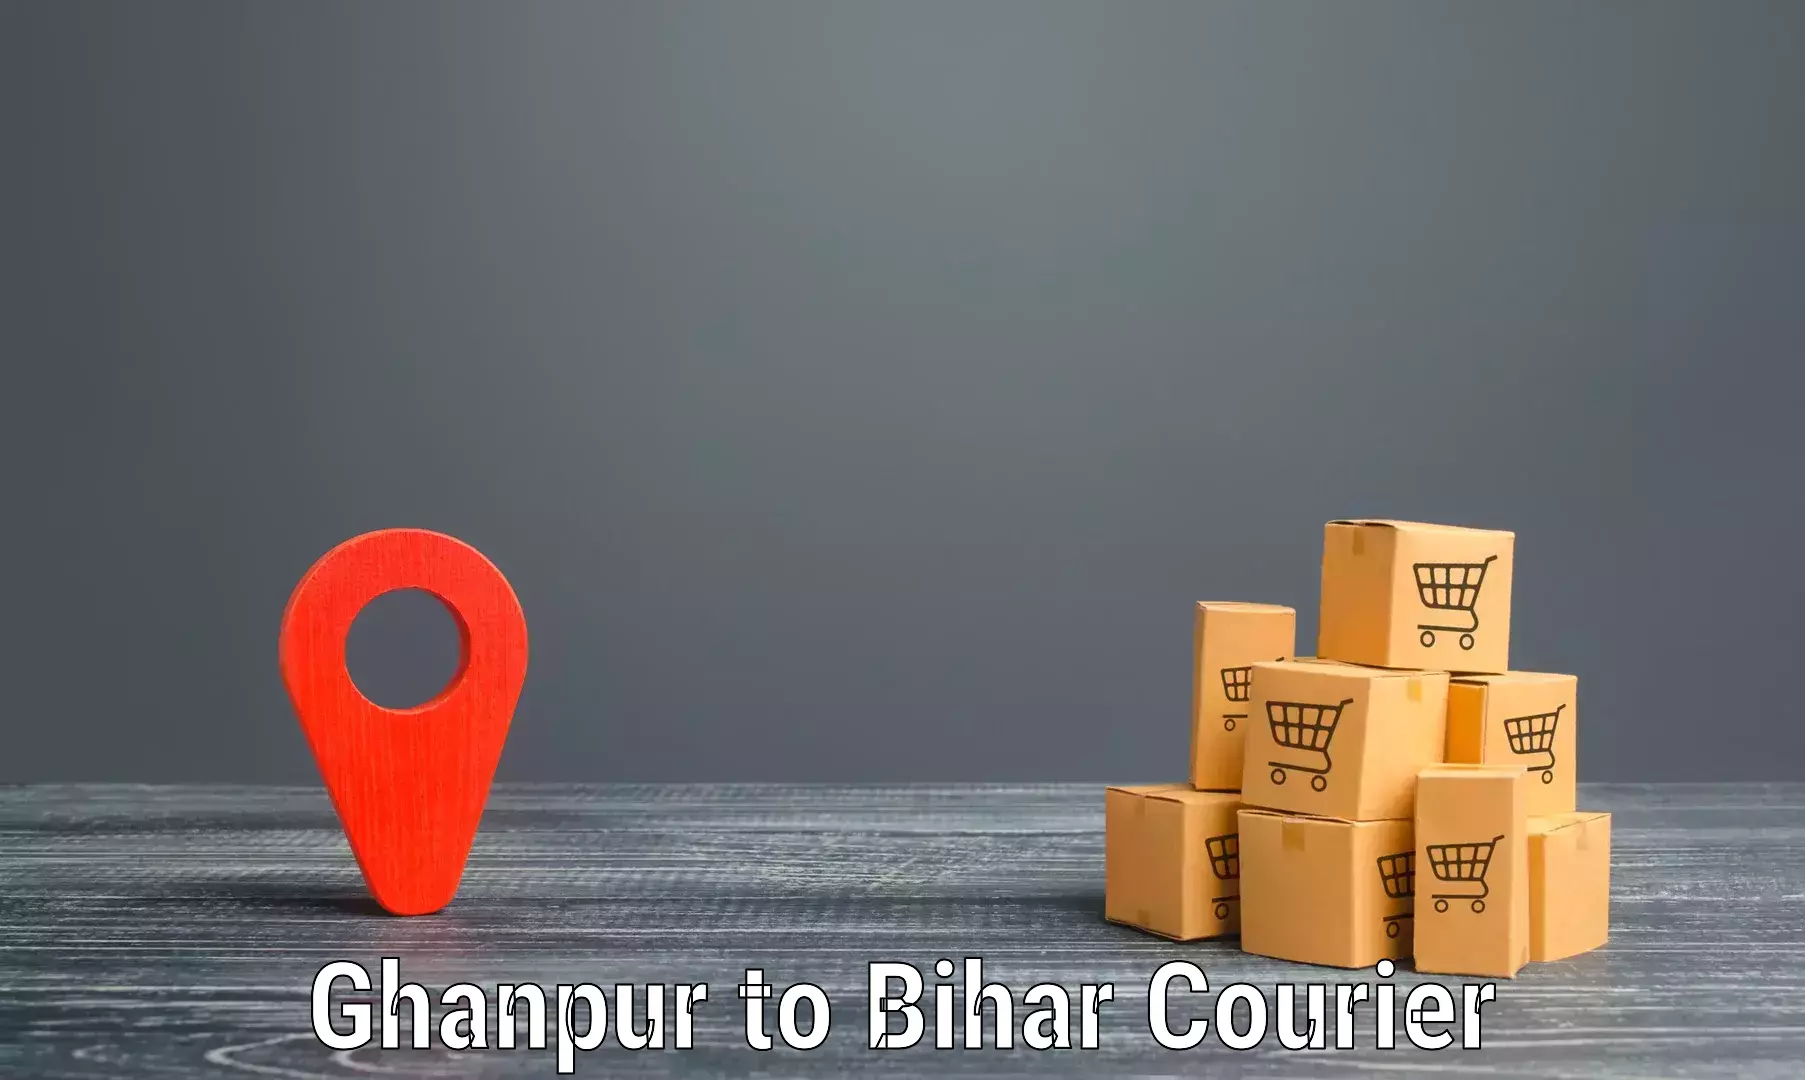 Nationwide courier service Ghanpur to Chainpur